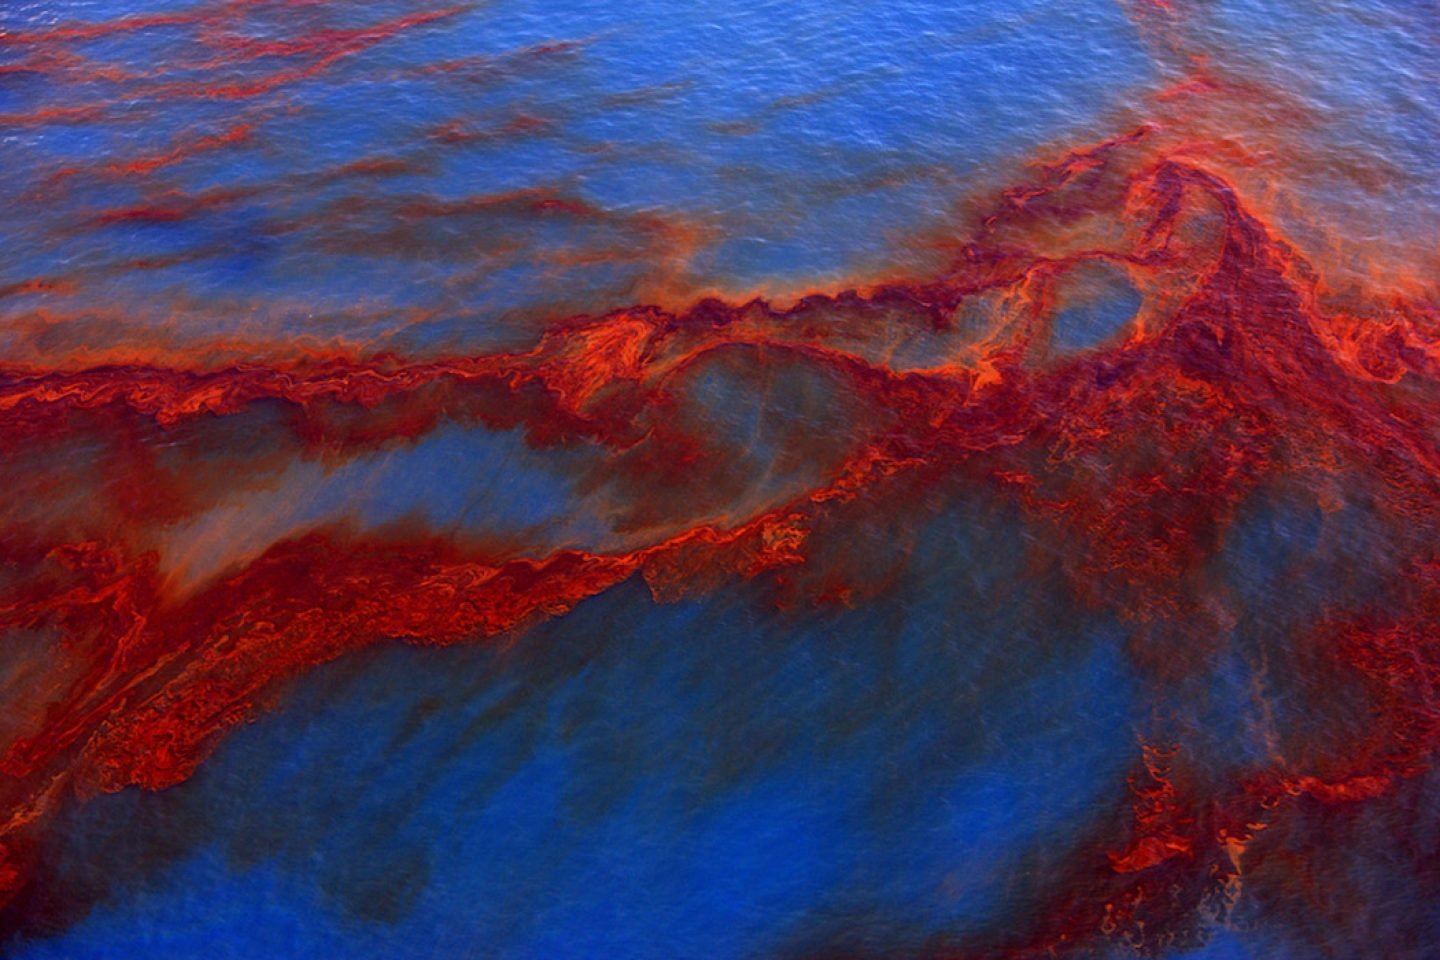 Oil from BP Deepwater Horizon spill at the Gulf Macondo well floats on the Gulf of Mexico